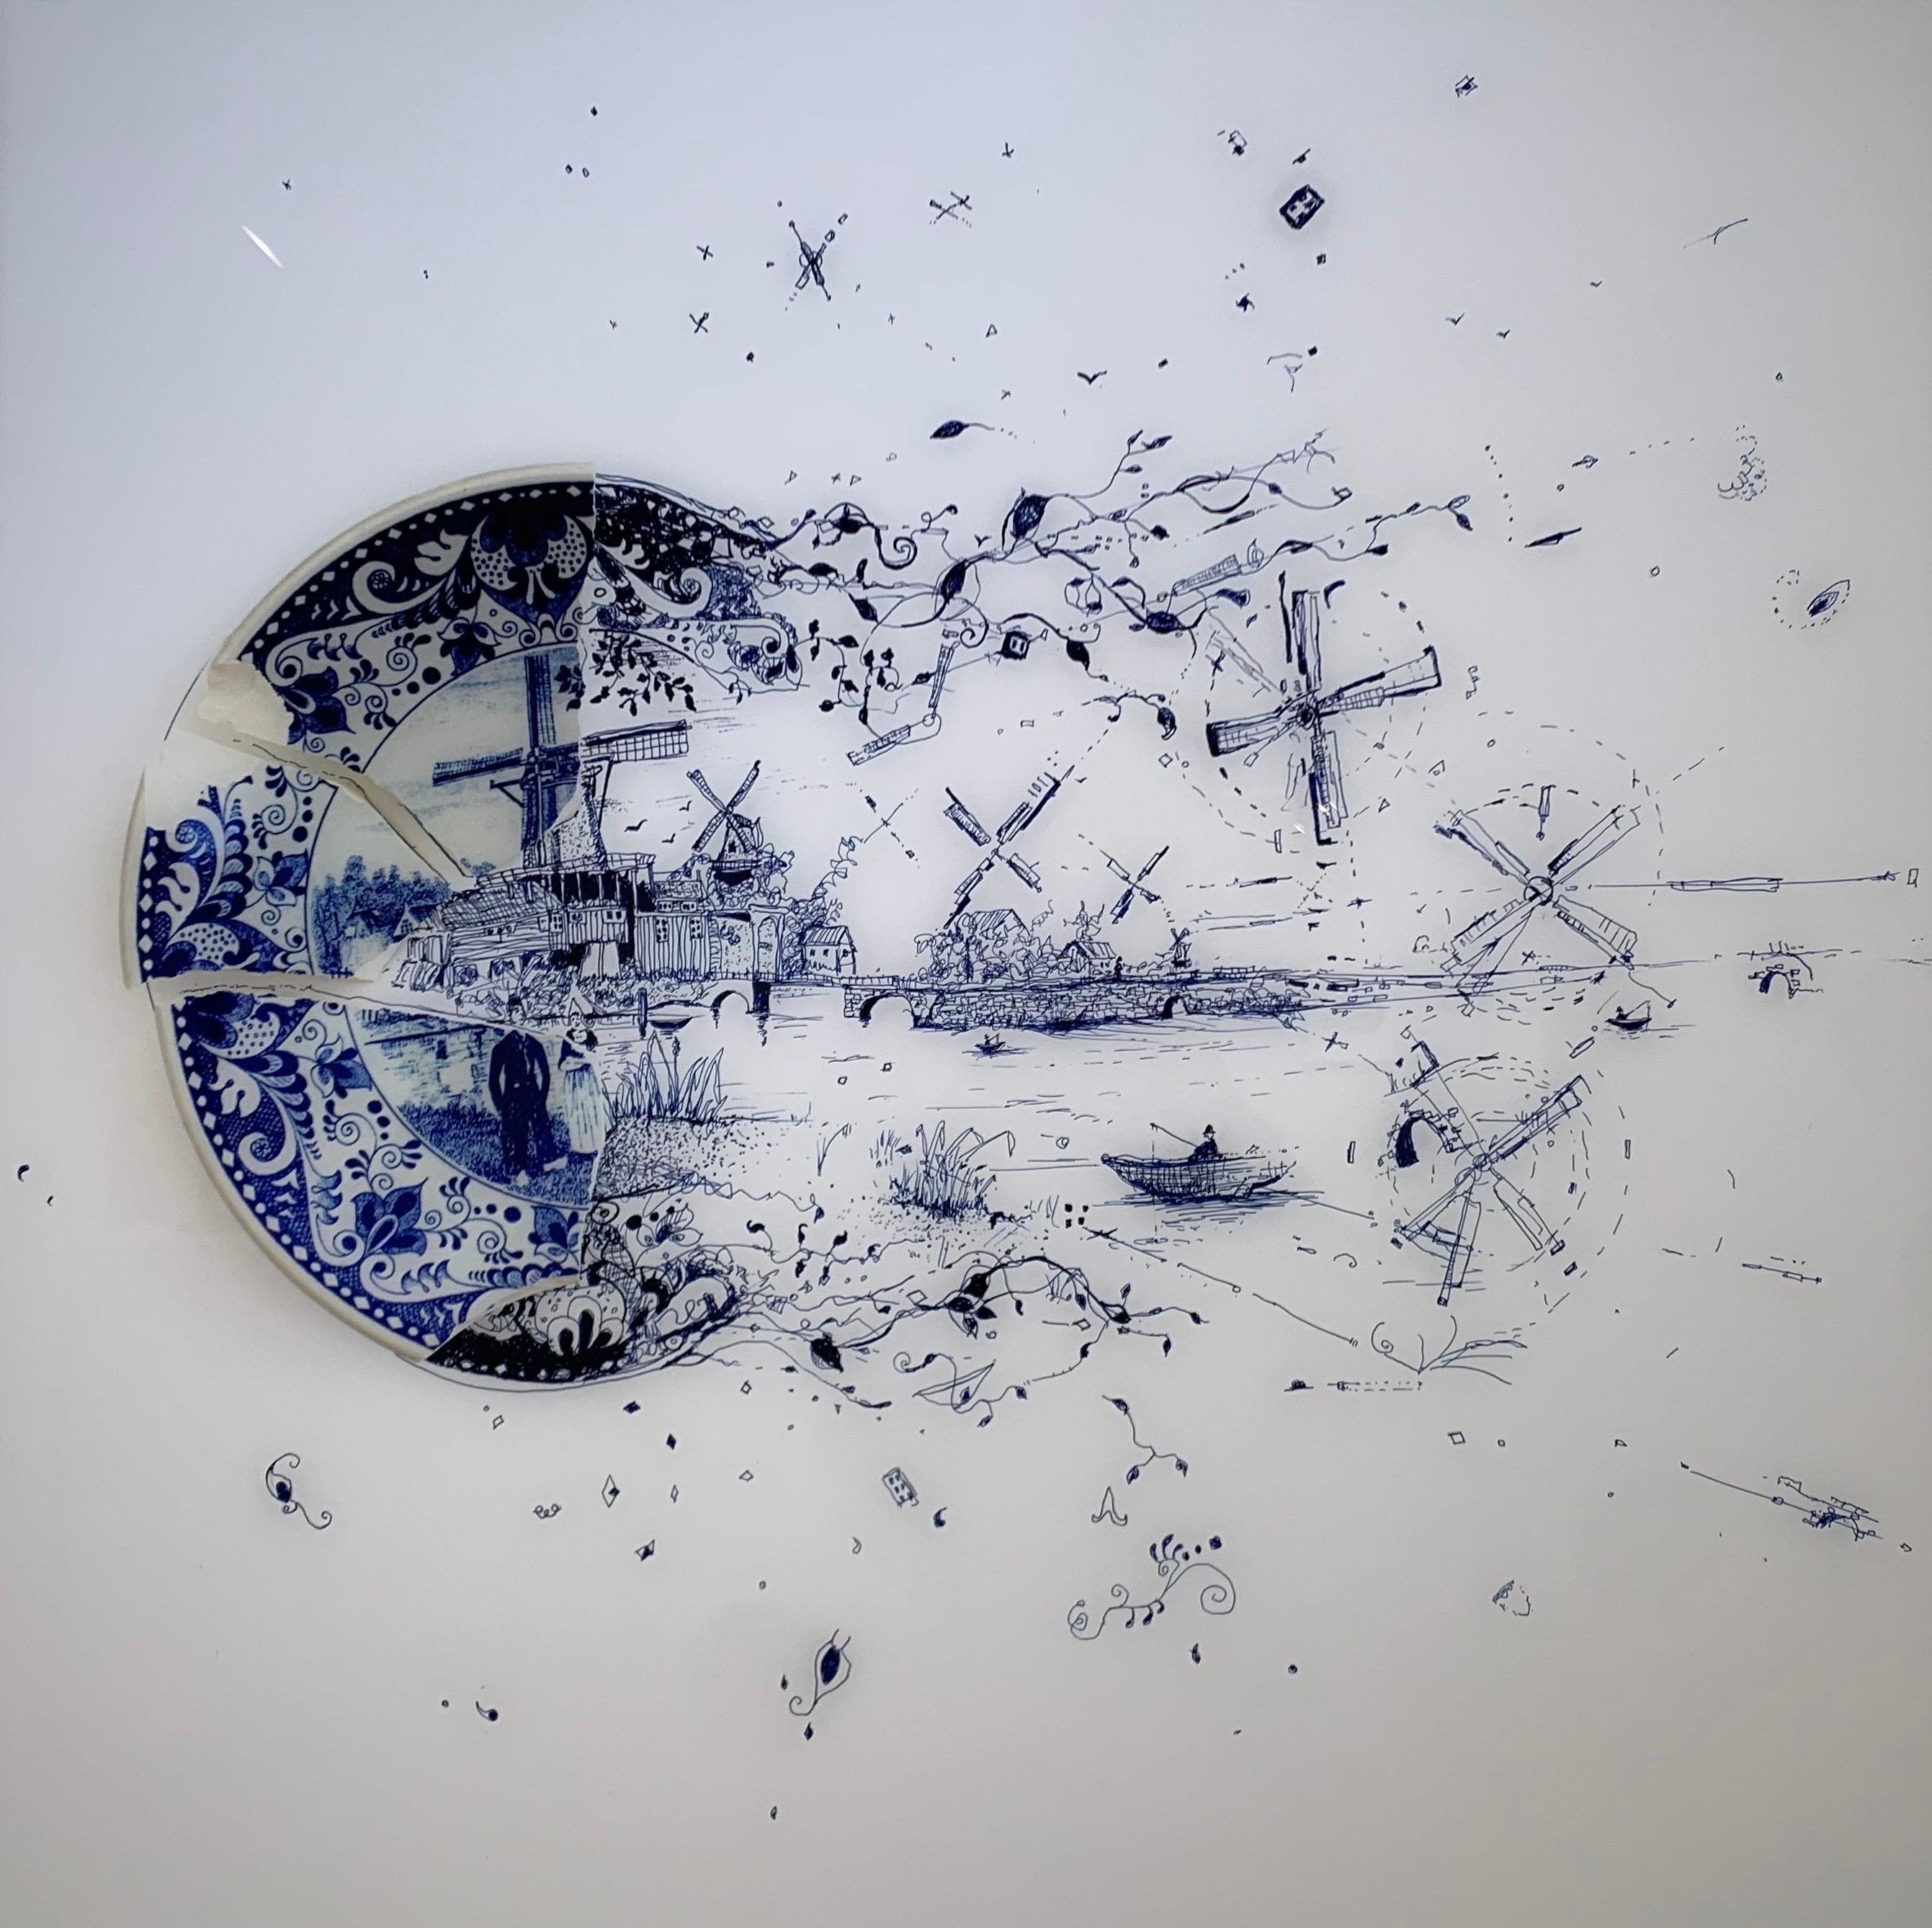 Prints on plexiglass - Fragmented in Blue with Windmills and Sailboat - Mixed Media Art by Robert Strati